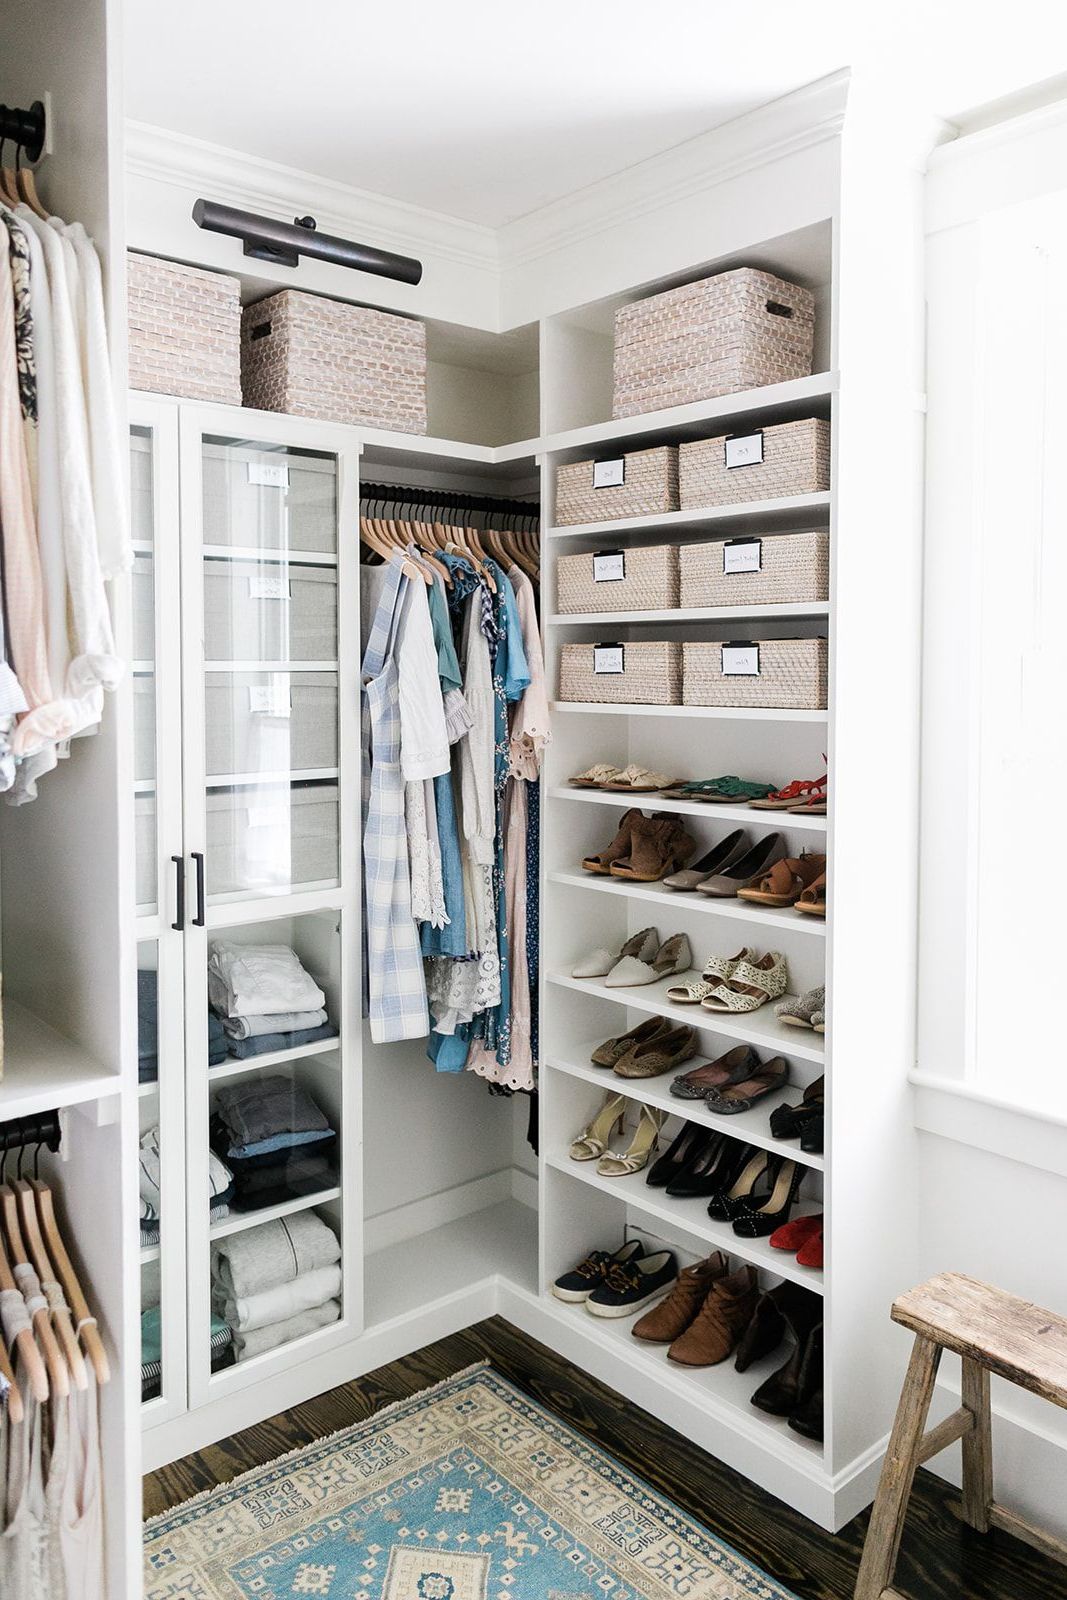 Ikea Closet Systems: What To Buy & How To Install Within Wardrobes Drawers And Shelves Ikea (Gallery 10 of 20)